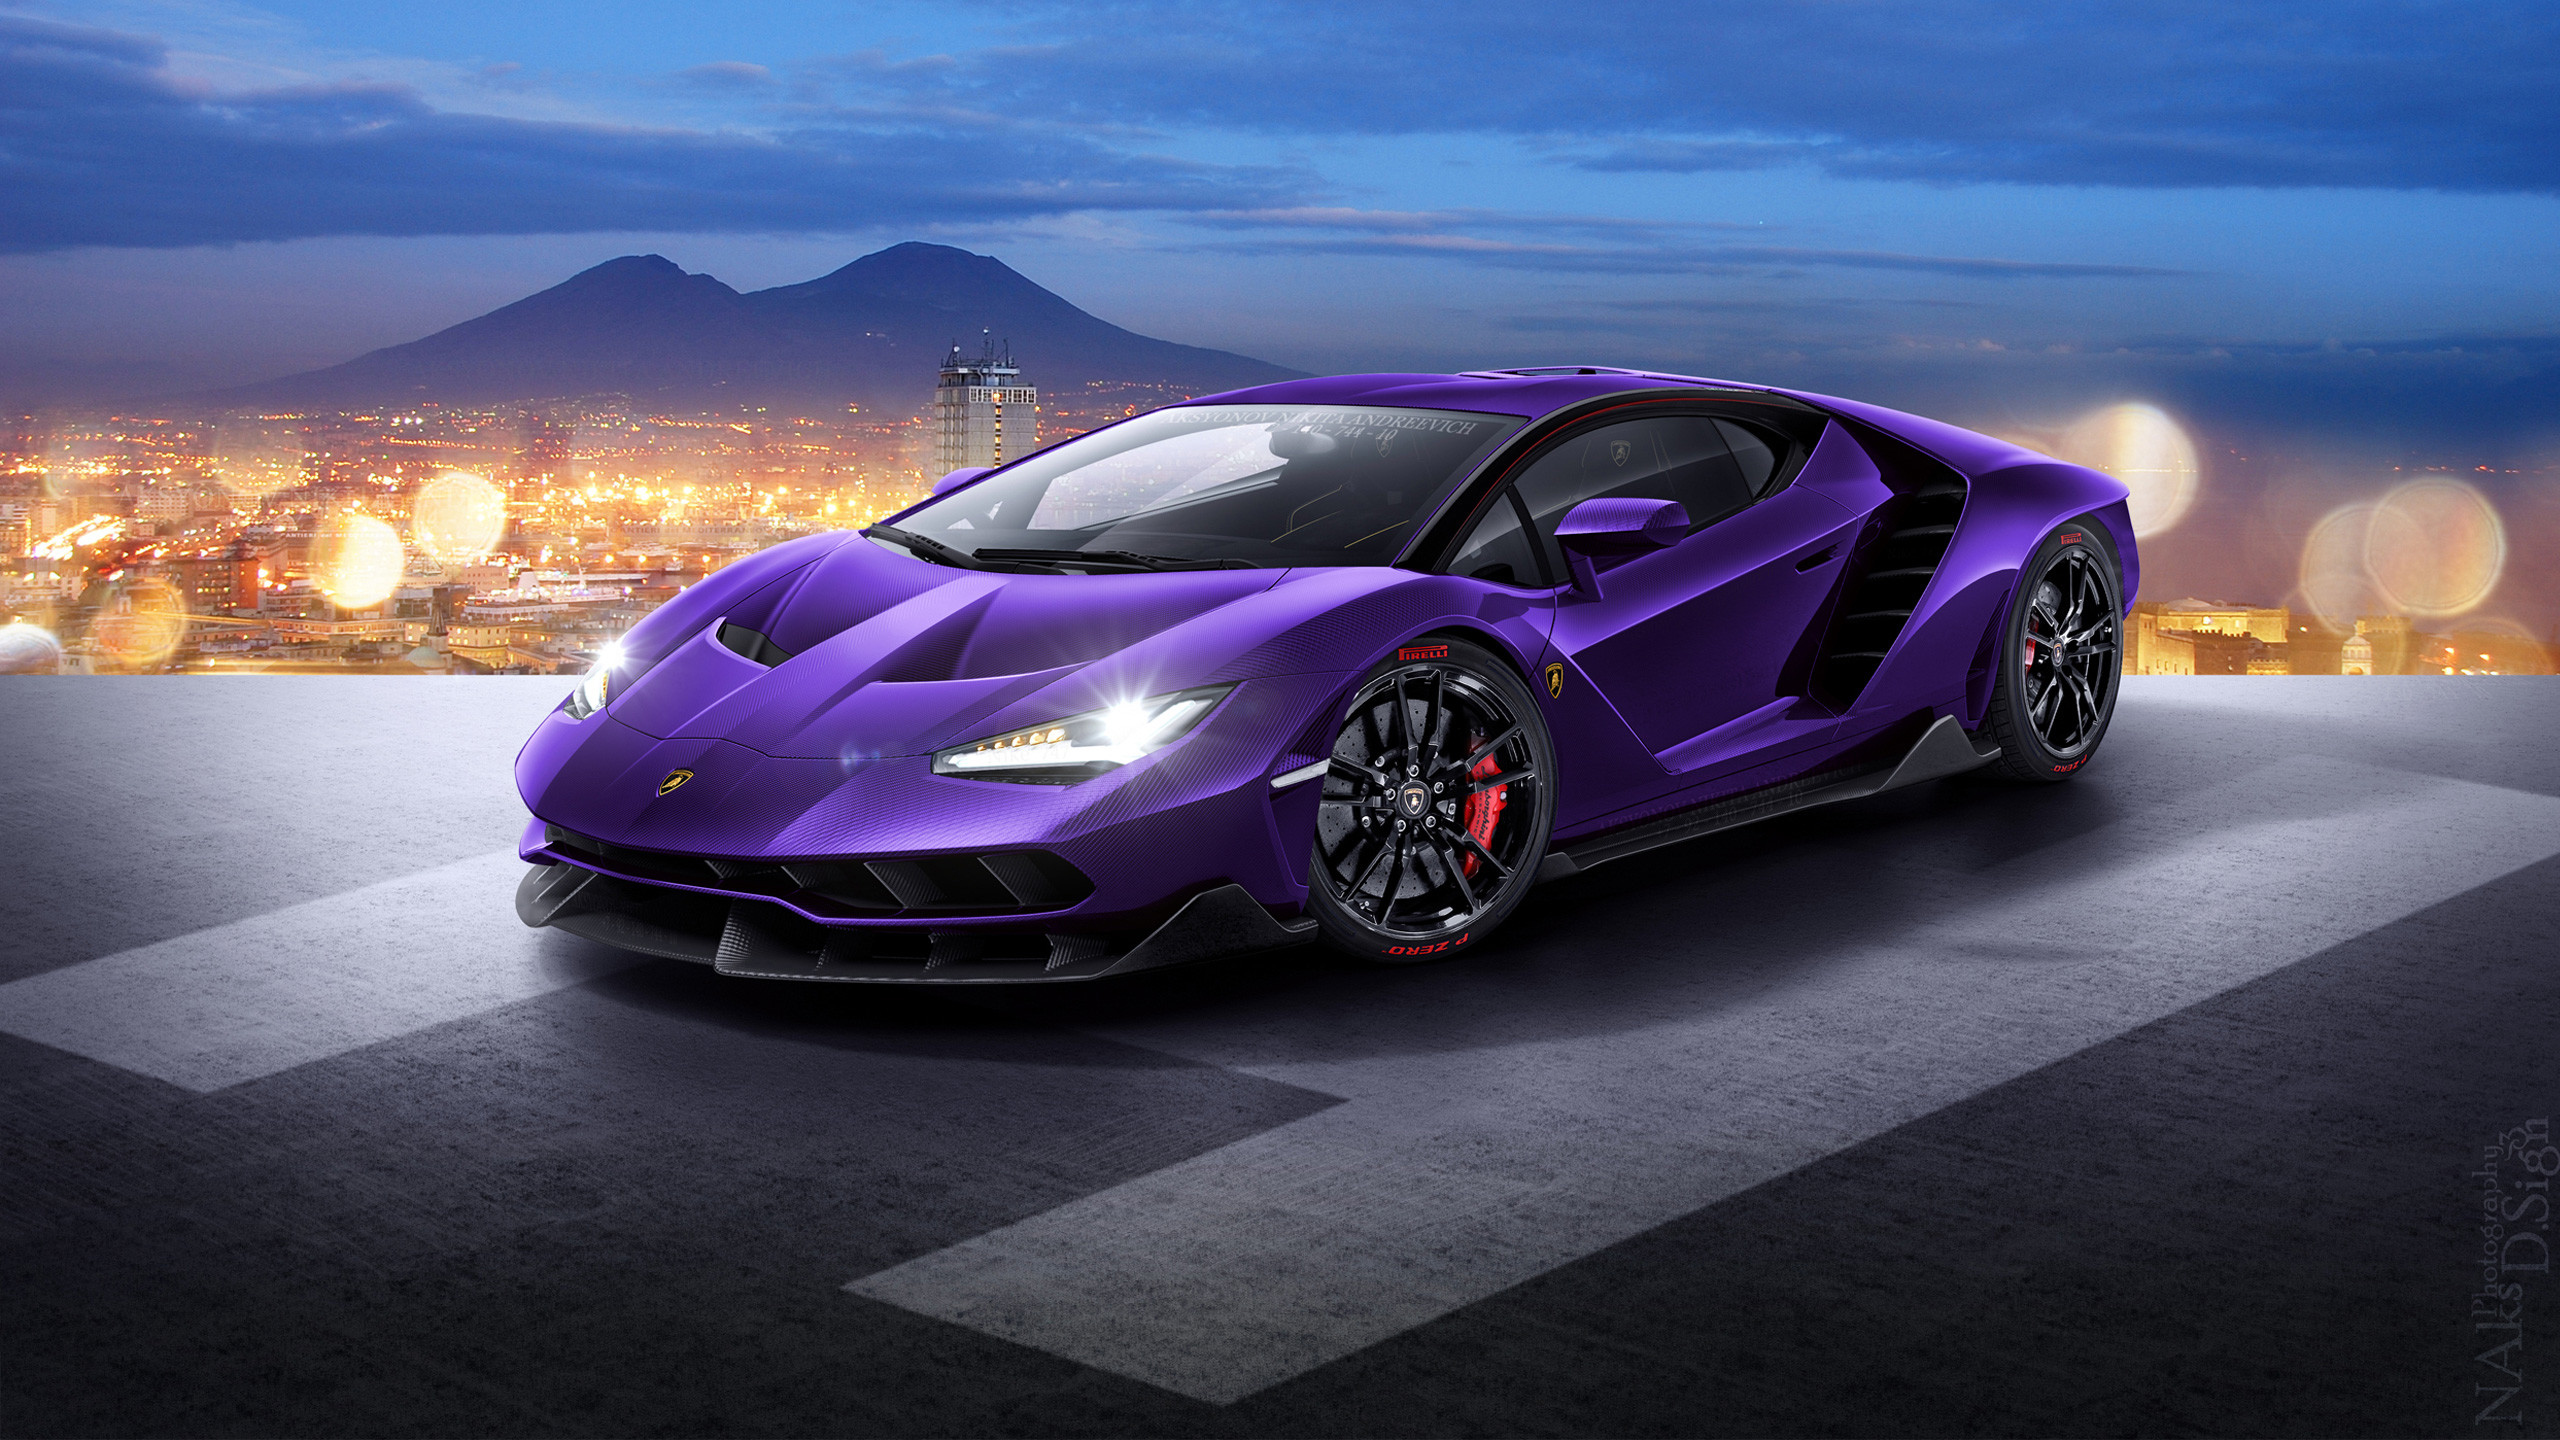 2560x1440 best lamborghini wallpapers Category: Car Download HD Wallpaper - Page 2››  Page 2